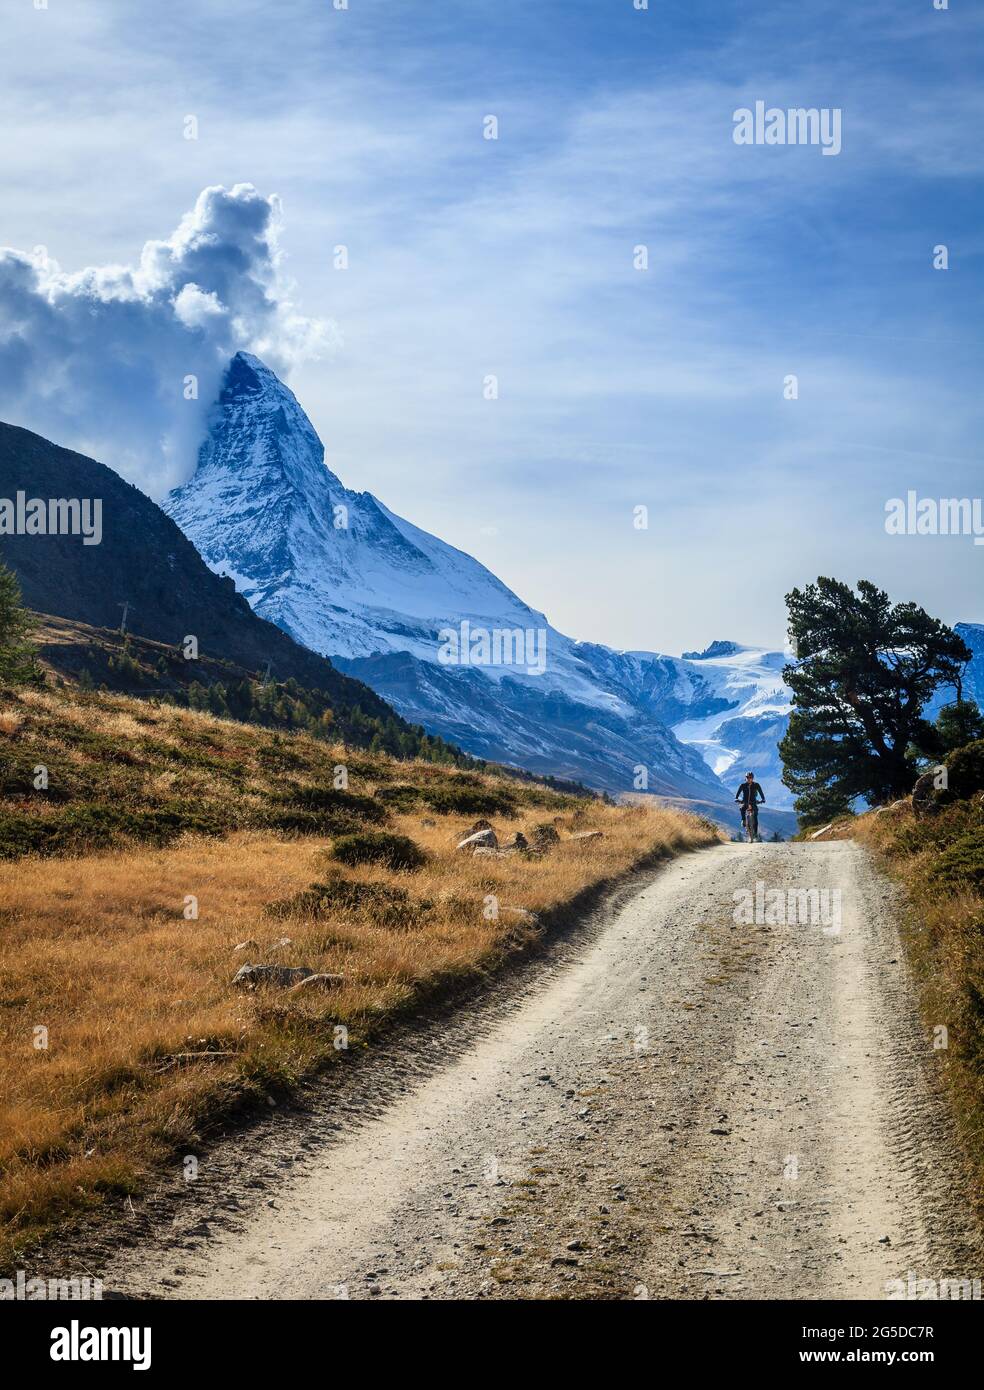 A bicyclist on a dirt road in Swiss Alps with Matterhorn in the backdrop Stock Photo